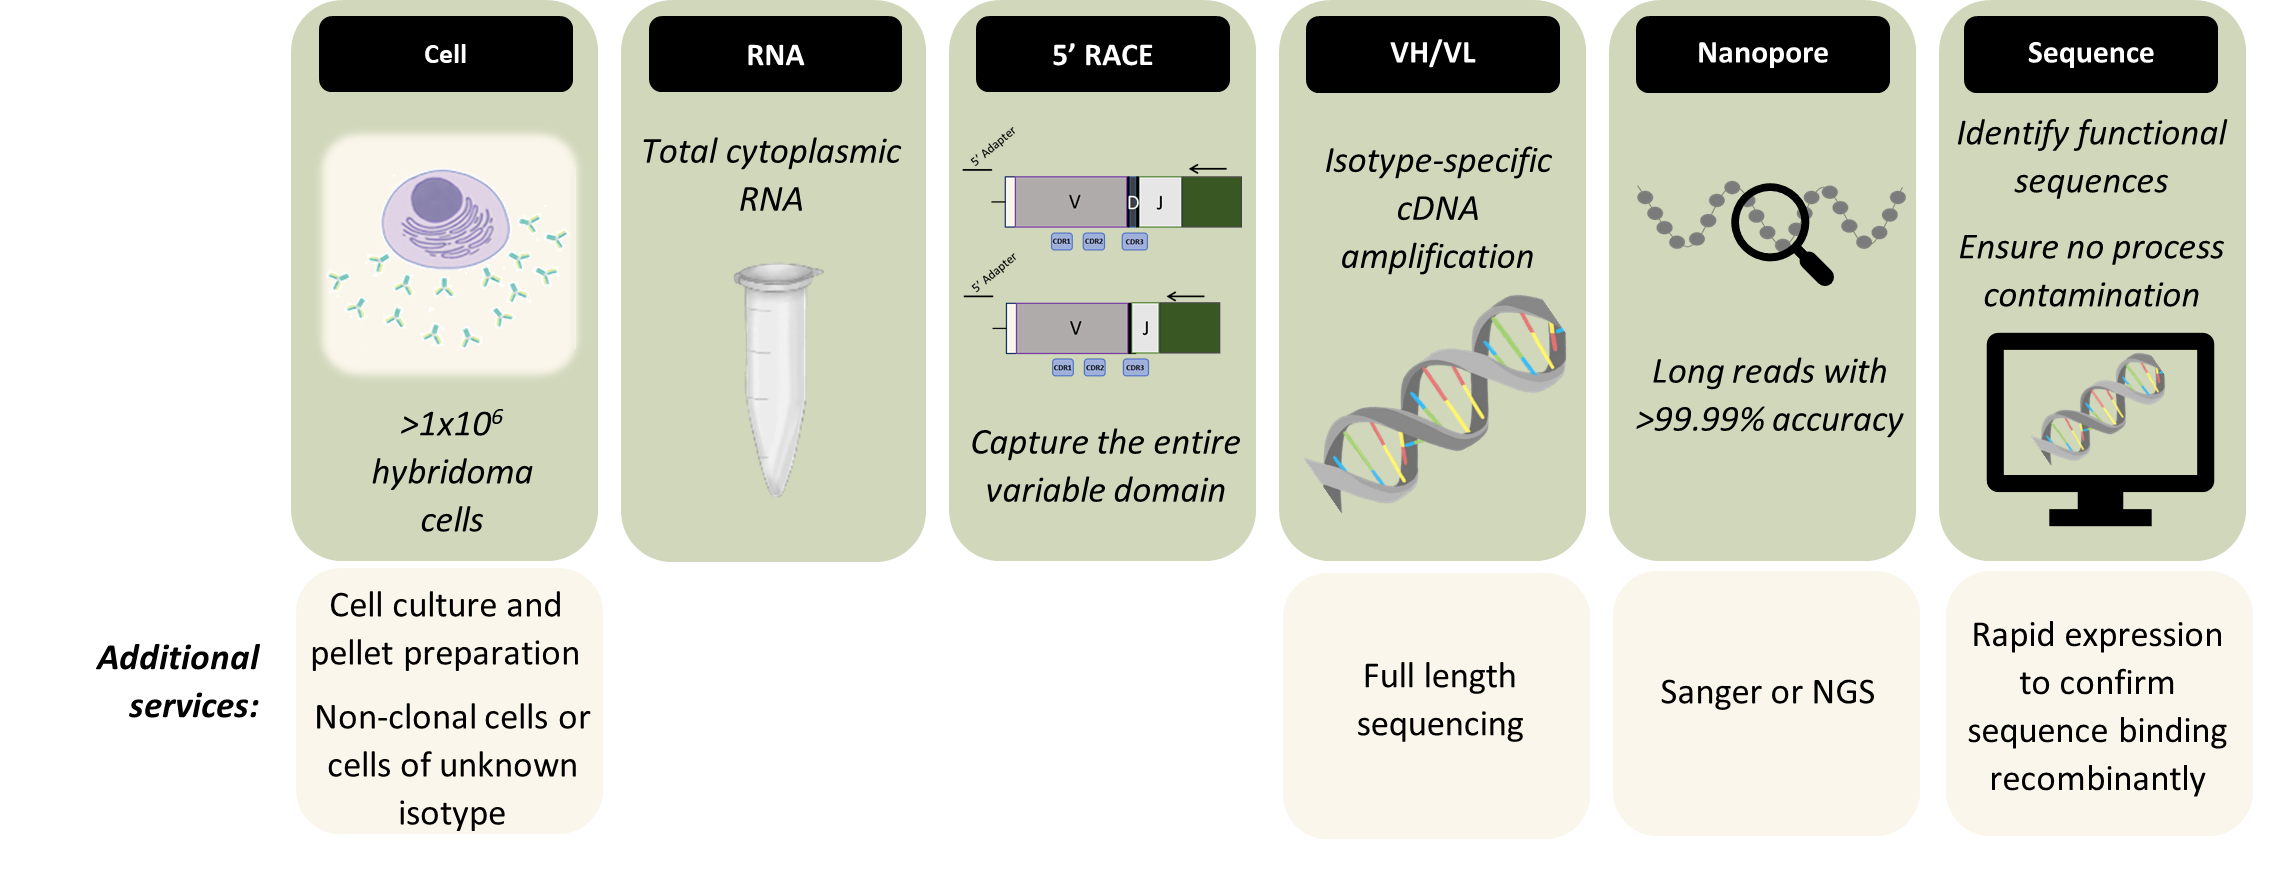 The key steps to obtaining an antibody sequence